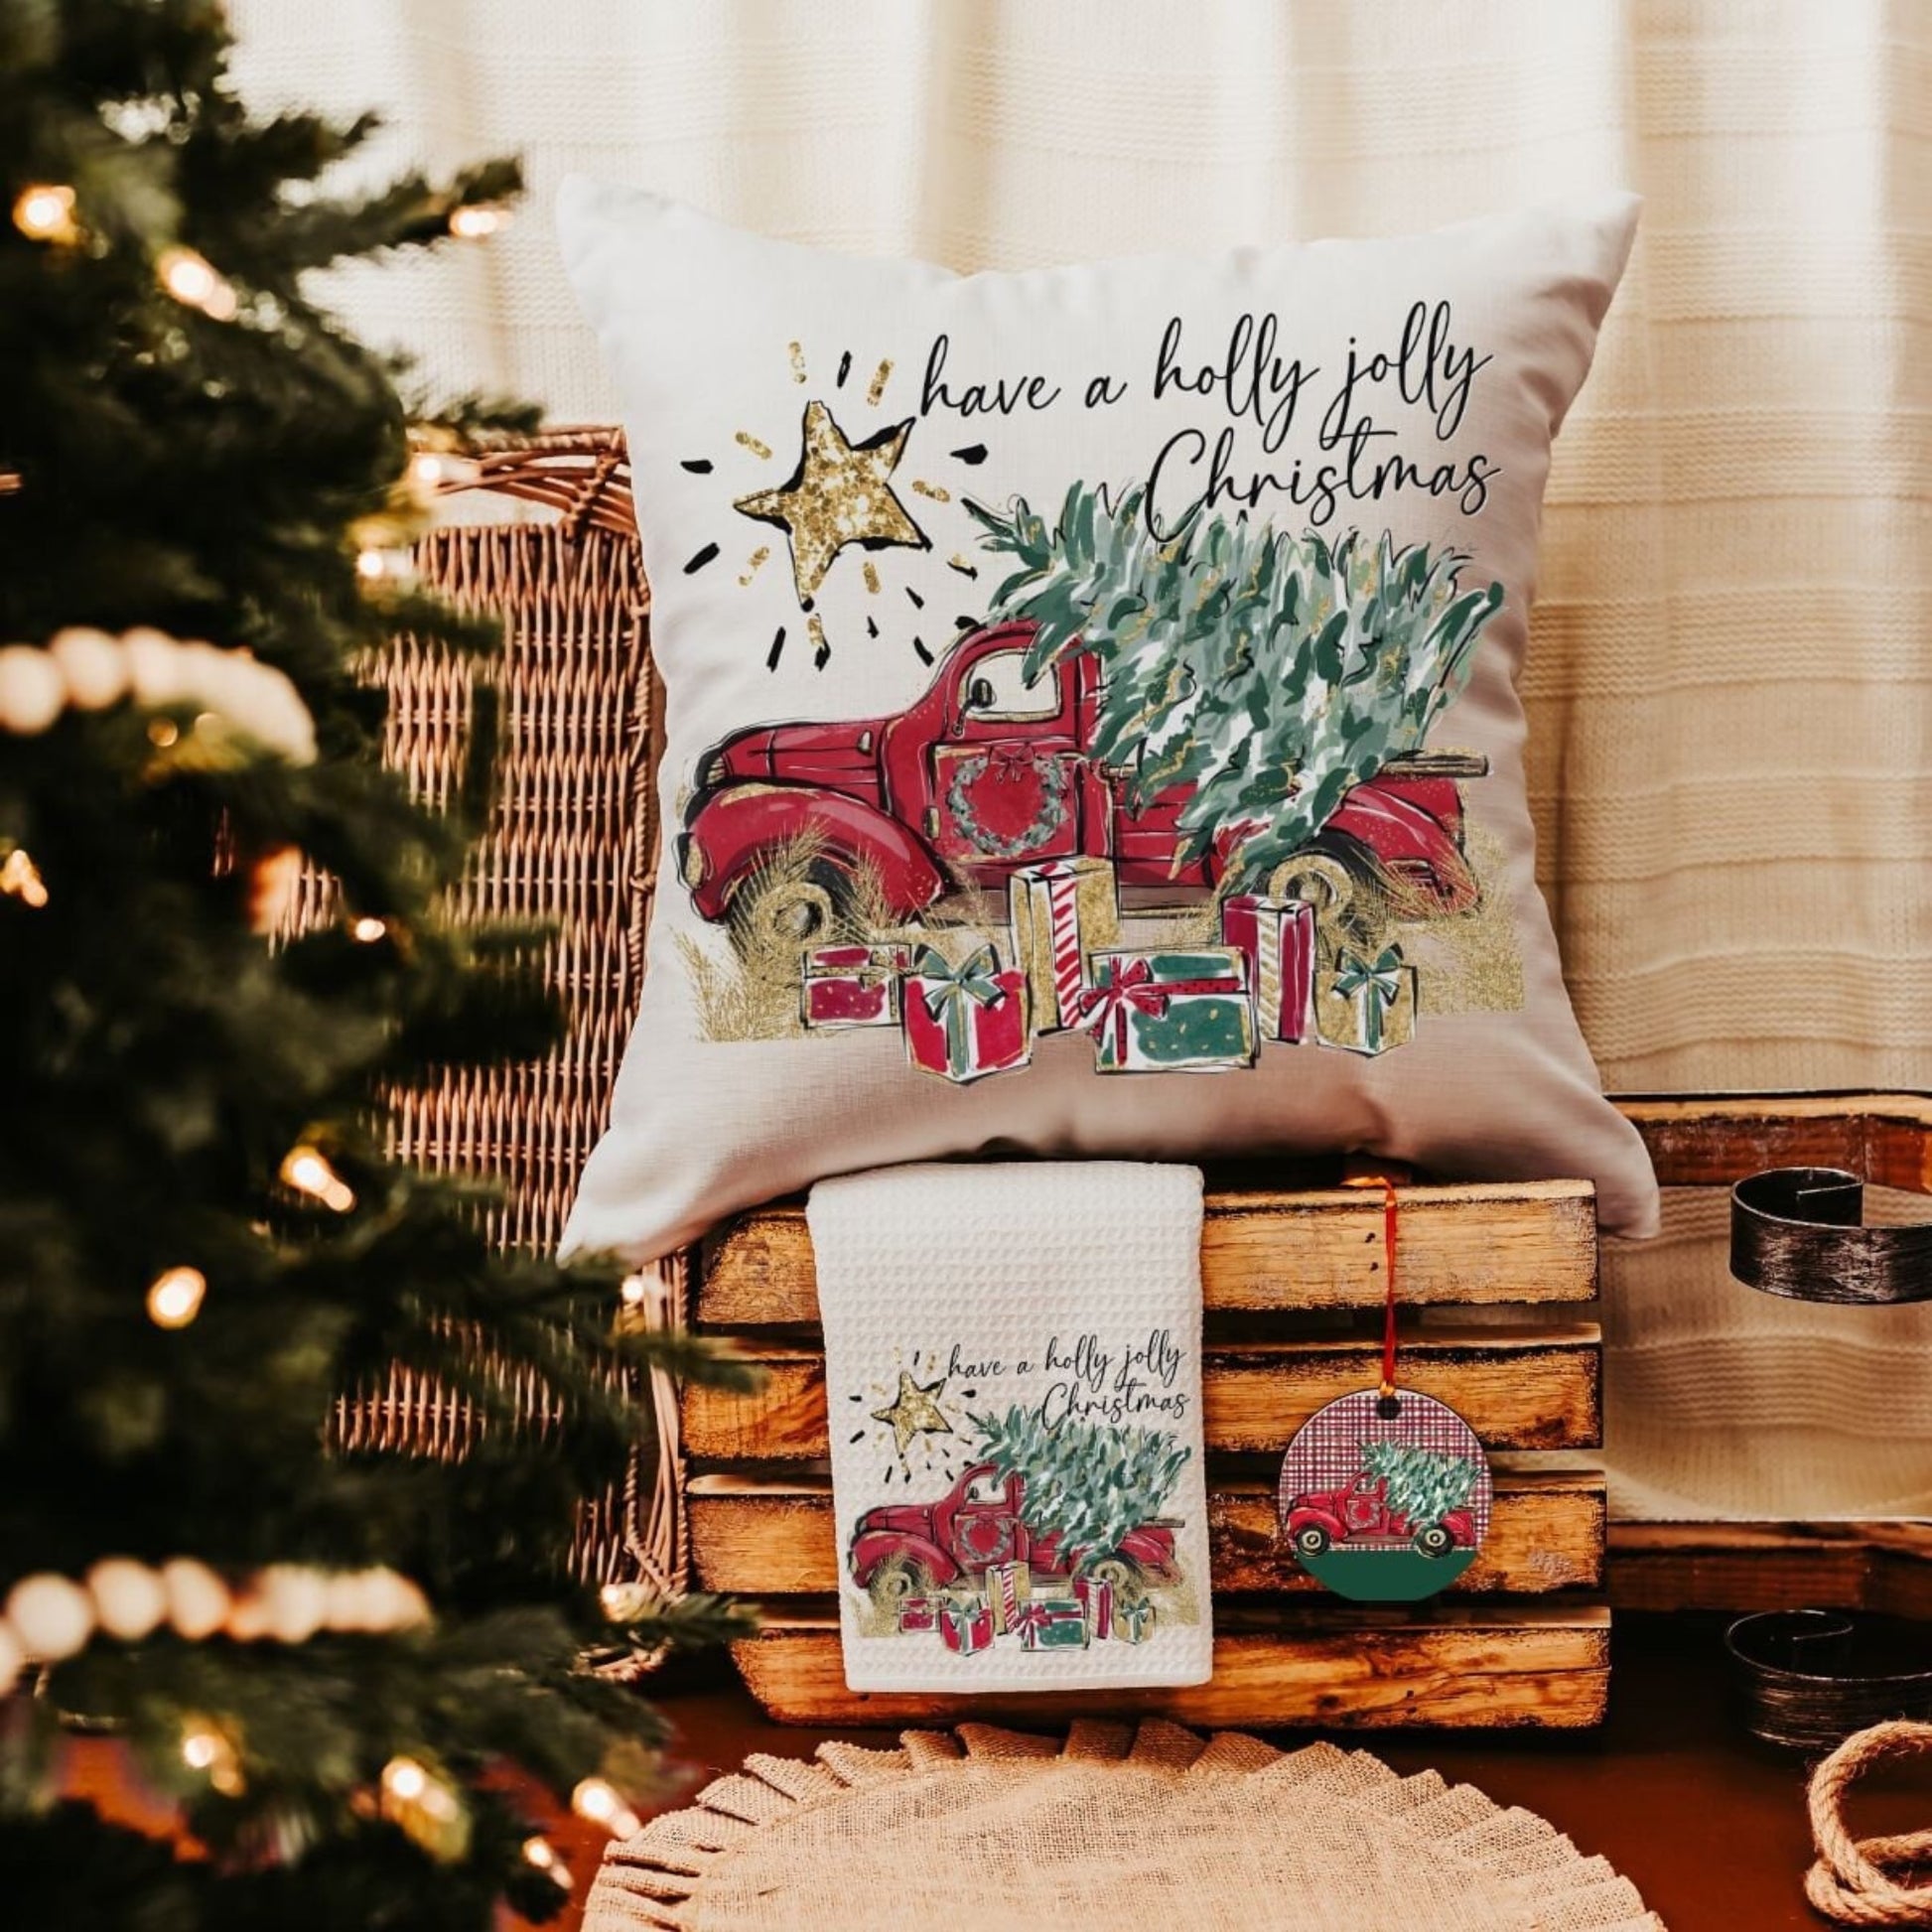 Have A Holly Jolly Christmas Pillow, Ornament & Towel Gift Set